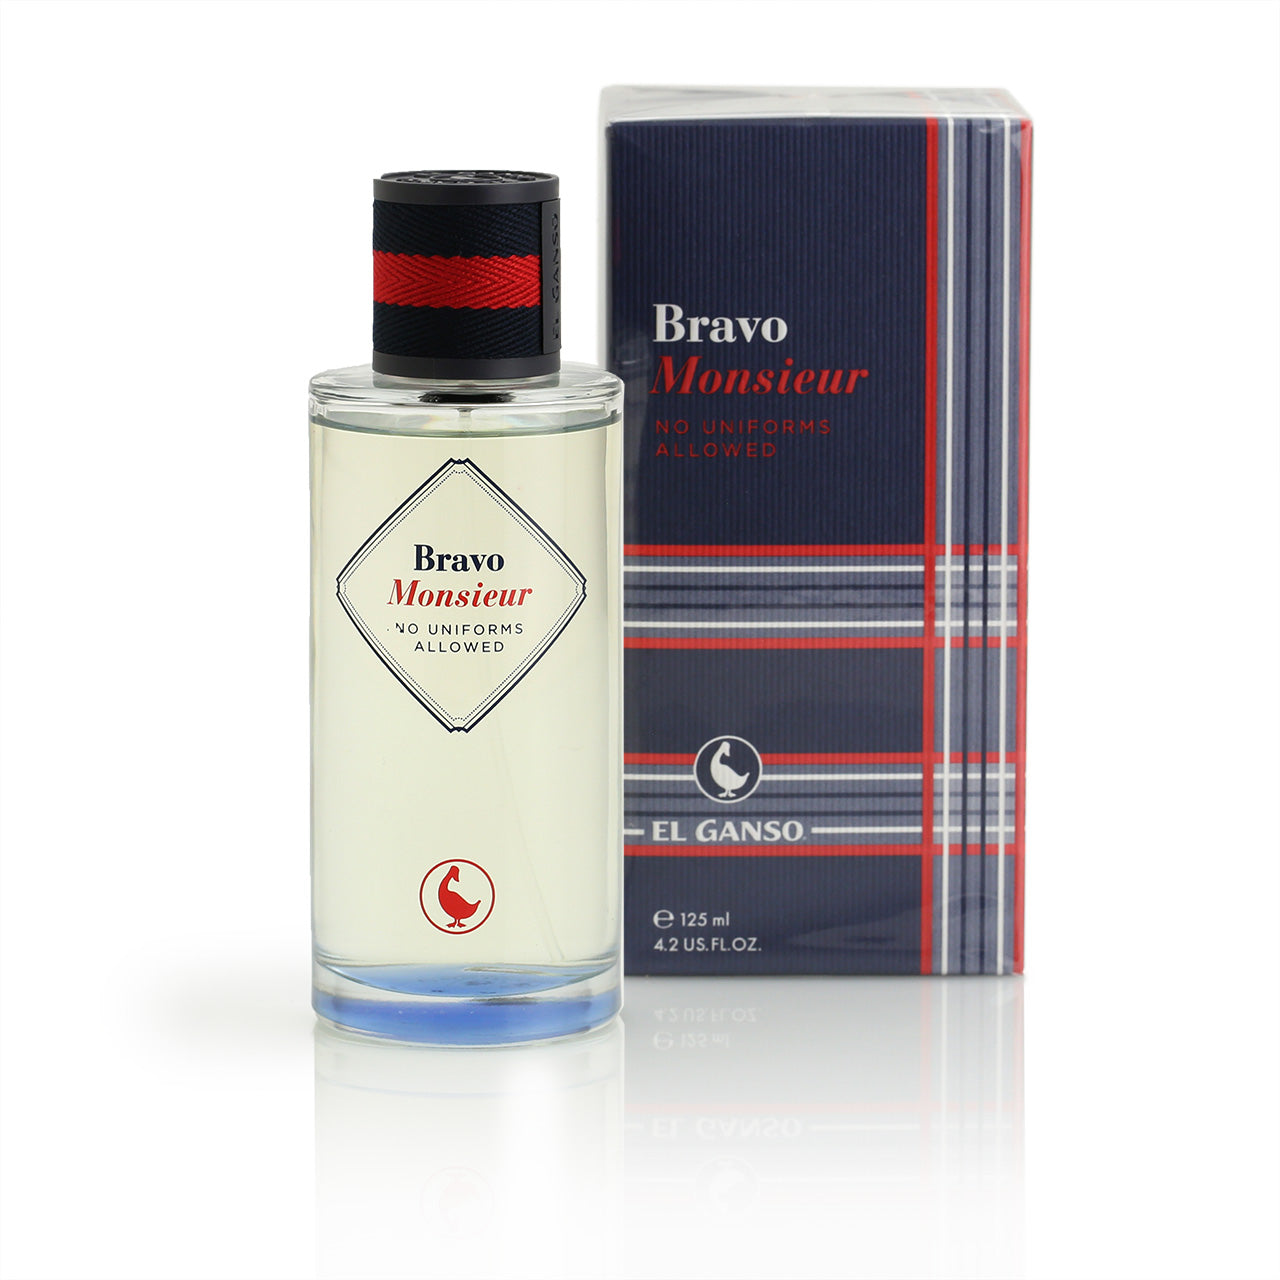 Bravo Monsieu EDT bottle with it's check-patterned packaging